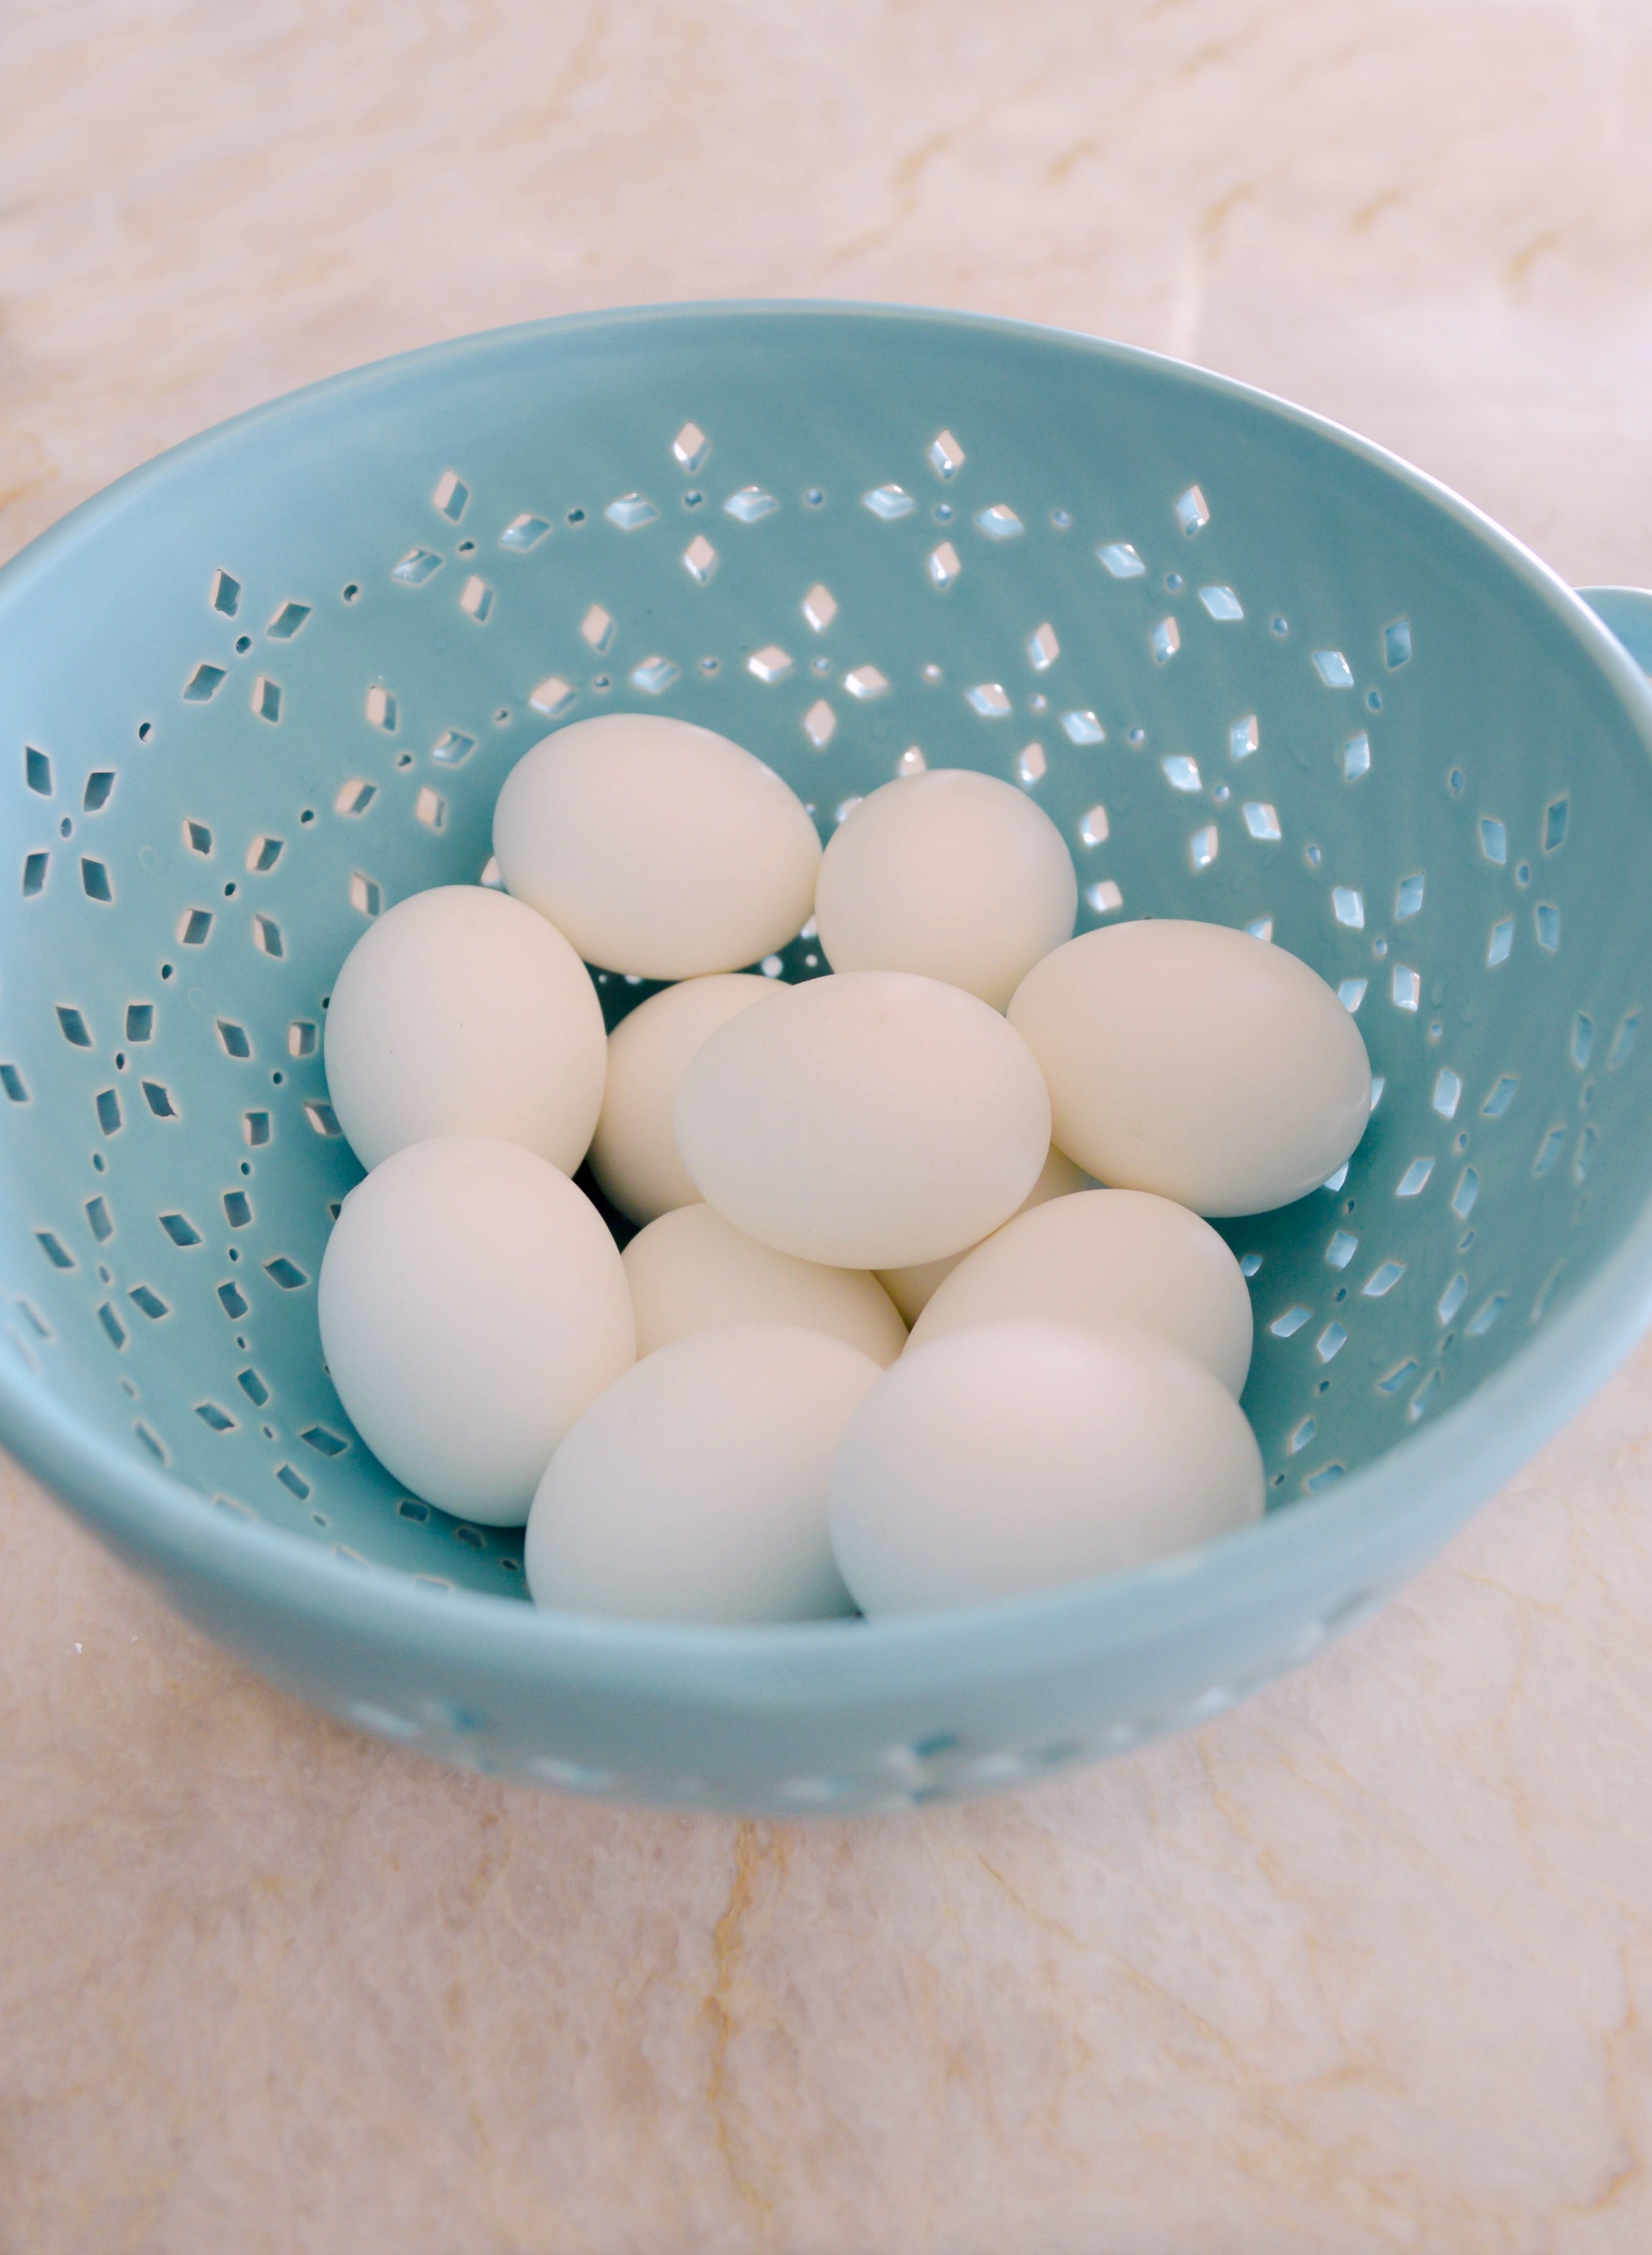 How To Make A Perfect Hard Boiled Egg